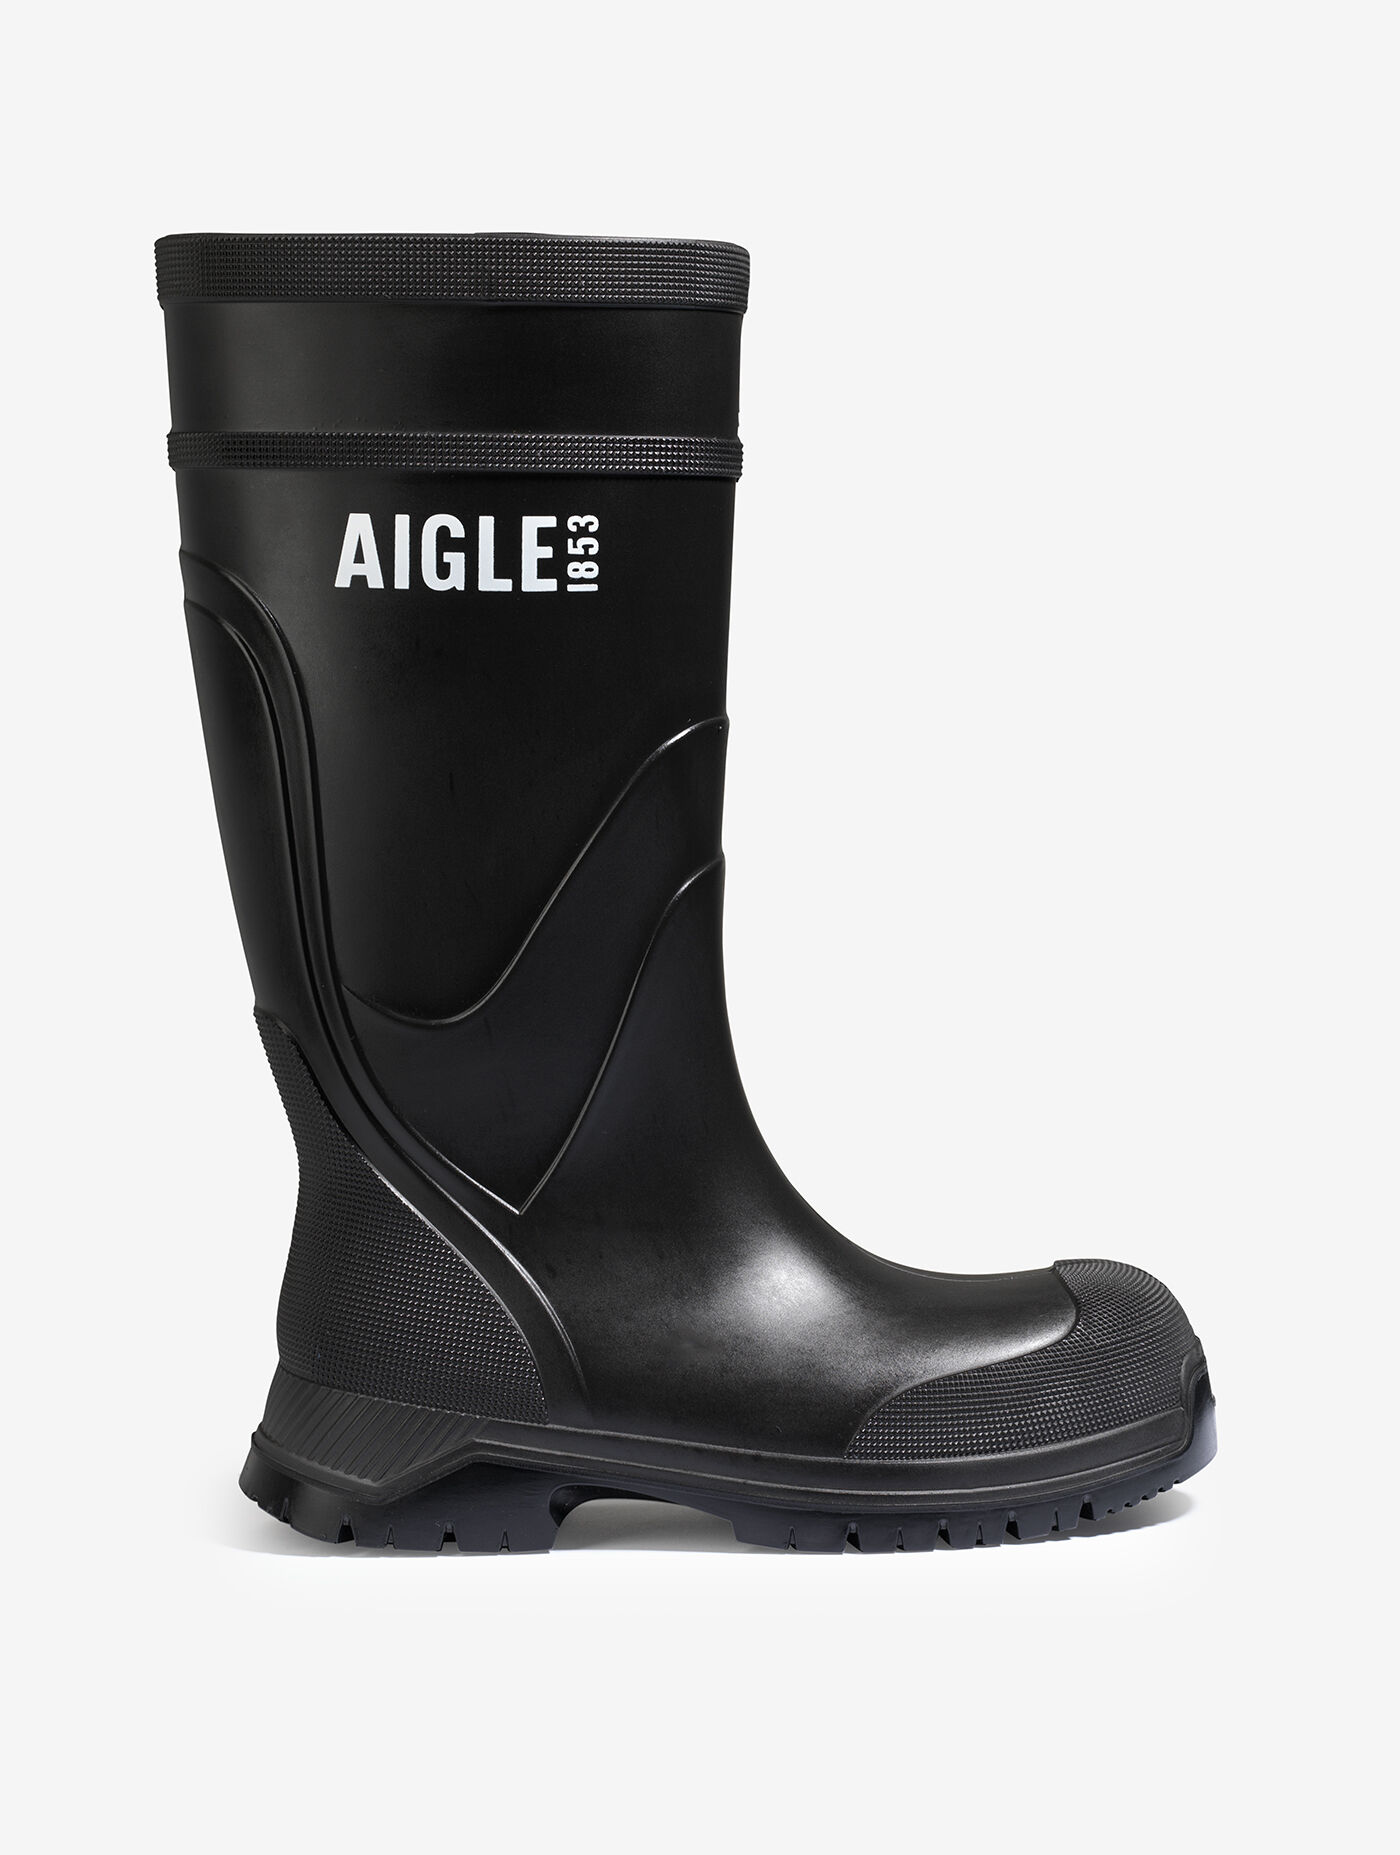 New Aigle Parcours 2 Vario Mens Womens Adjustable Wellies Wellington Boots 